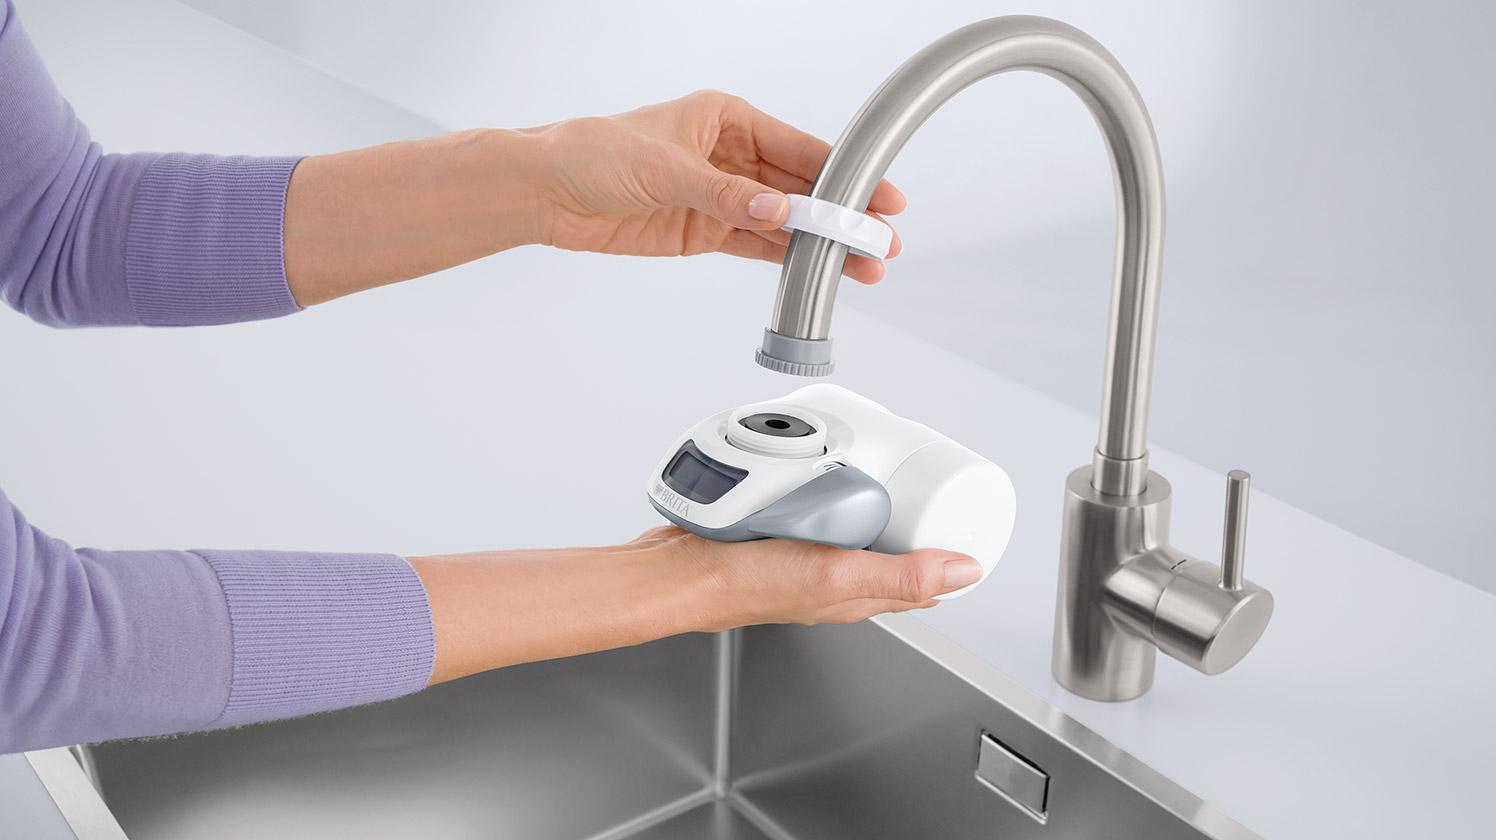 How To Install Brita Faucet Filter